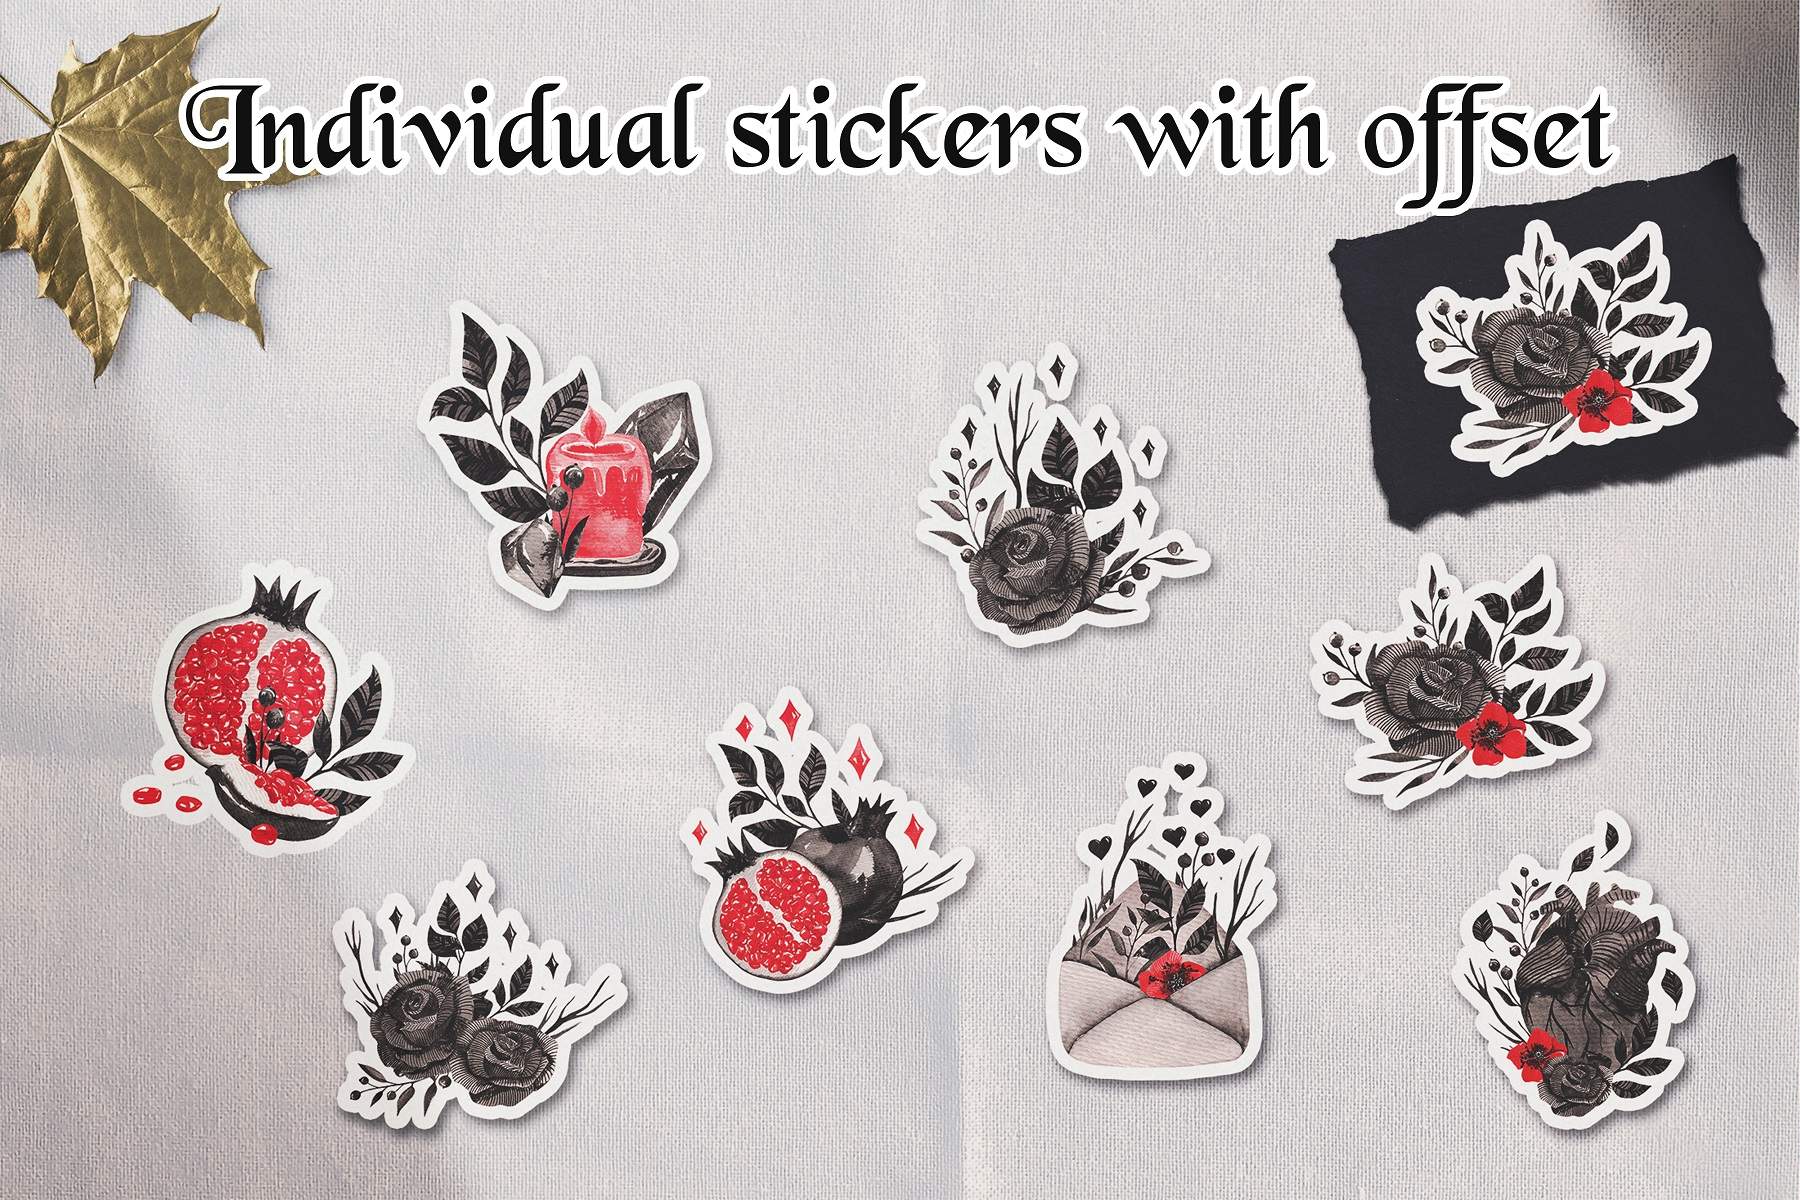 Bunch of stickers with different designs on them.